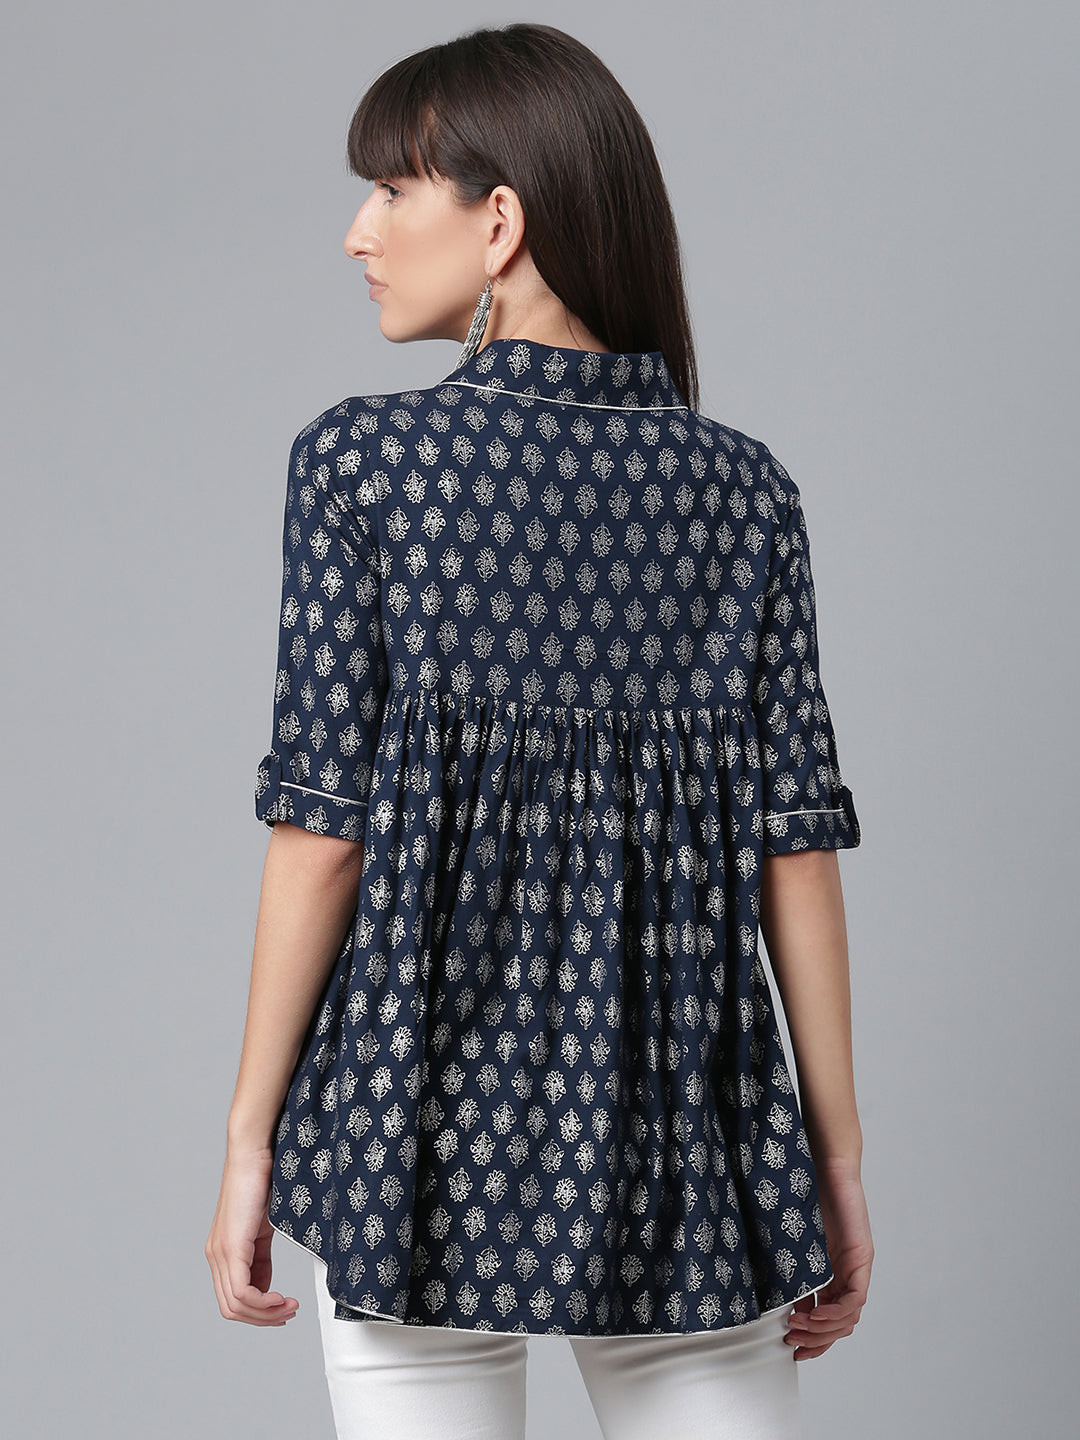 Viscose Rayon Navy Blue Foil Silver Printed Western Tunic